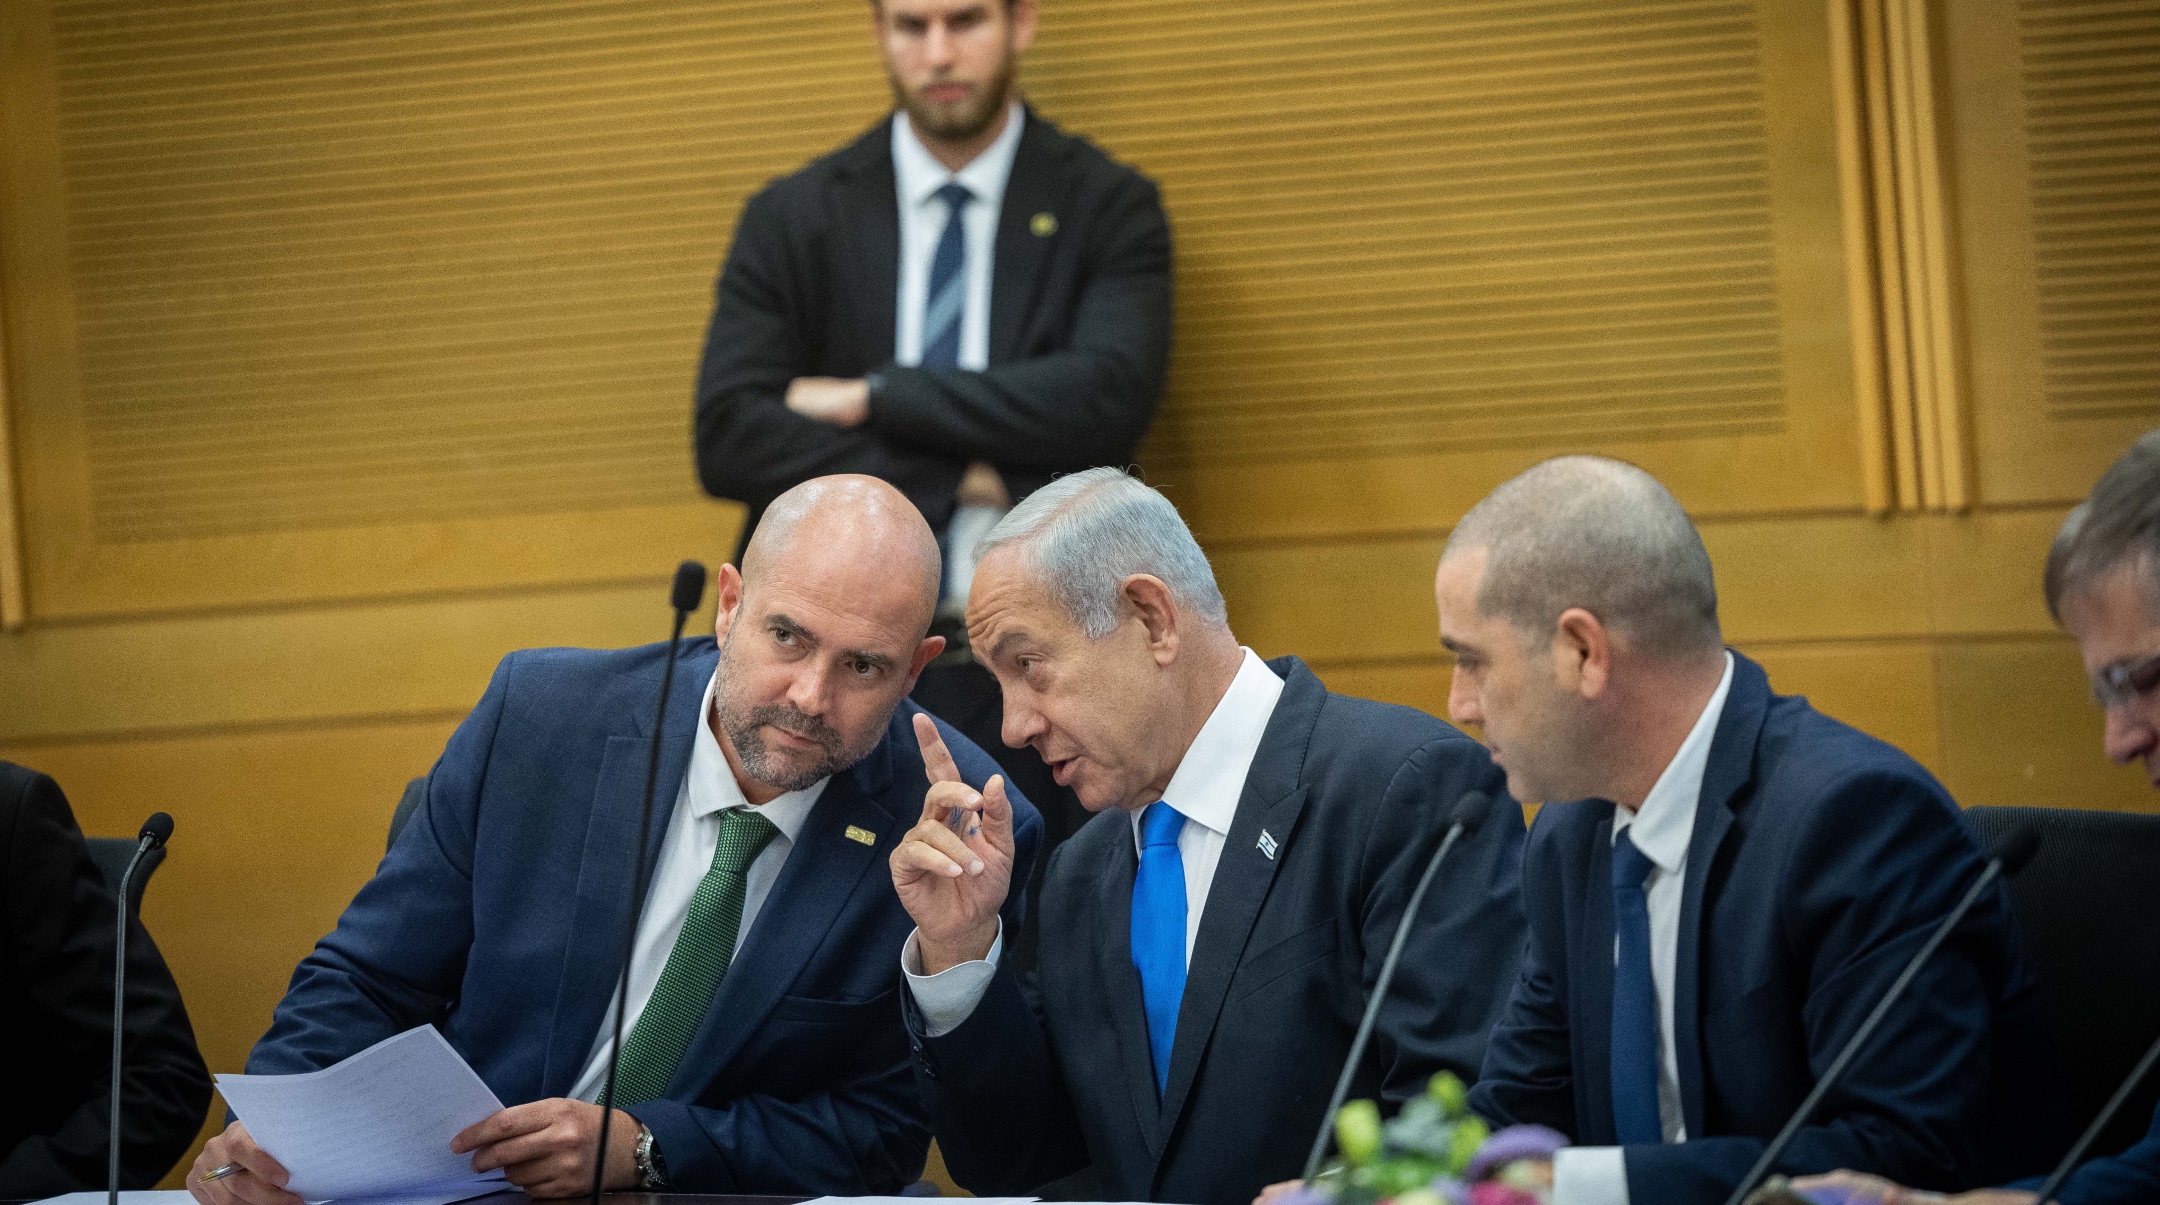 Israeli Prime Minister and head of the Likud party Benjamin Netanyahu with Knesset speaker Amir Ohana during a Likud party meeting at the Knesset, the Israeli parliament in Jerusalem, Feb. 6, 2023. (Yonatan Sindel/Flash90)